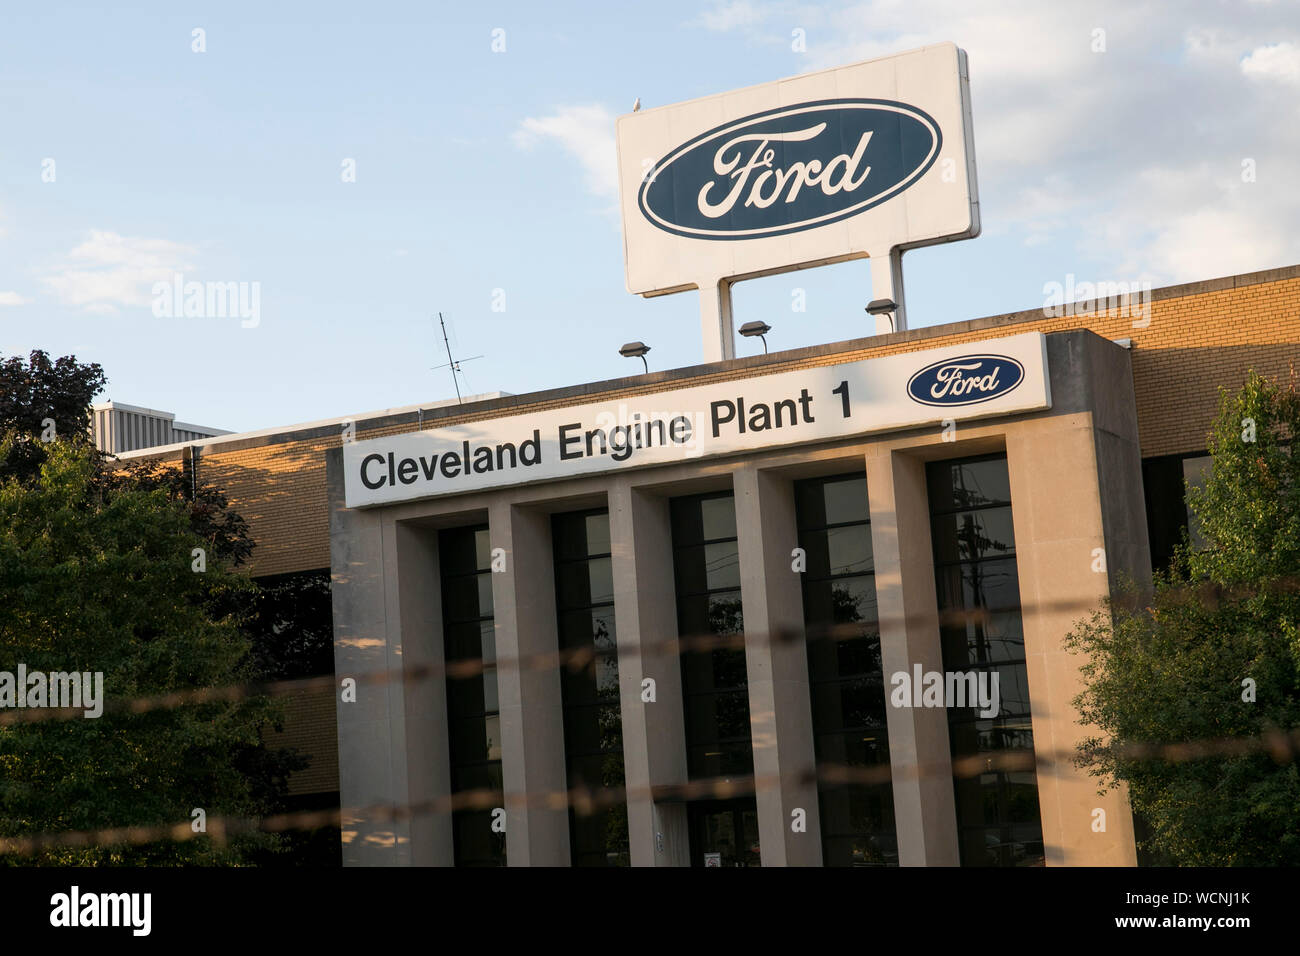 A logo sign outside of the Ford Cleveland Engine Plant in Cleveland, Ohio on August 12, 2019. Stock Photo